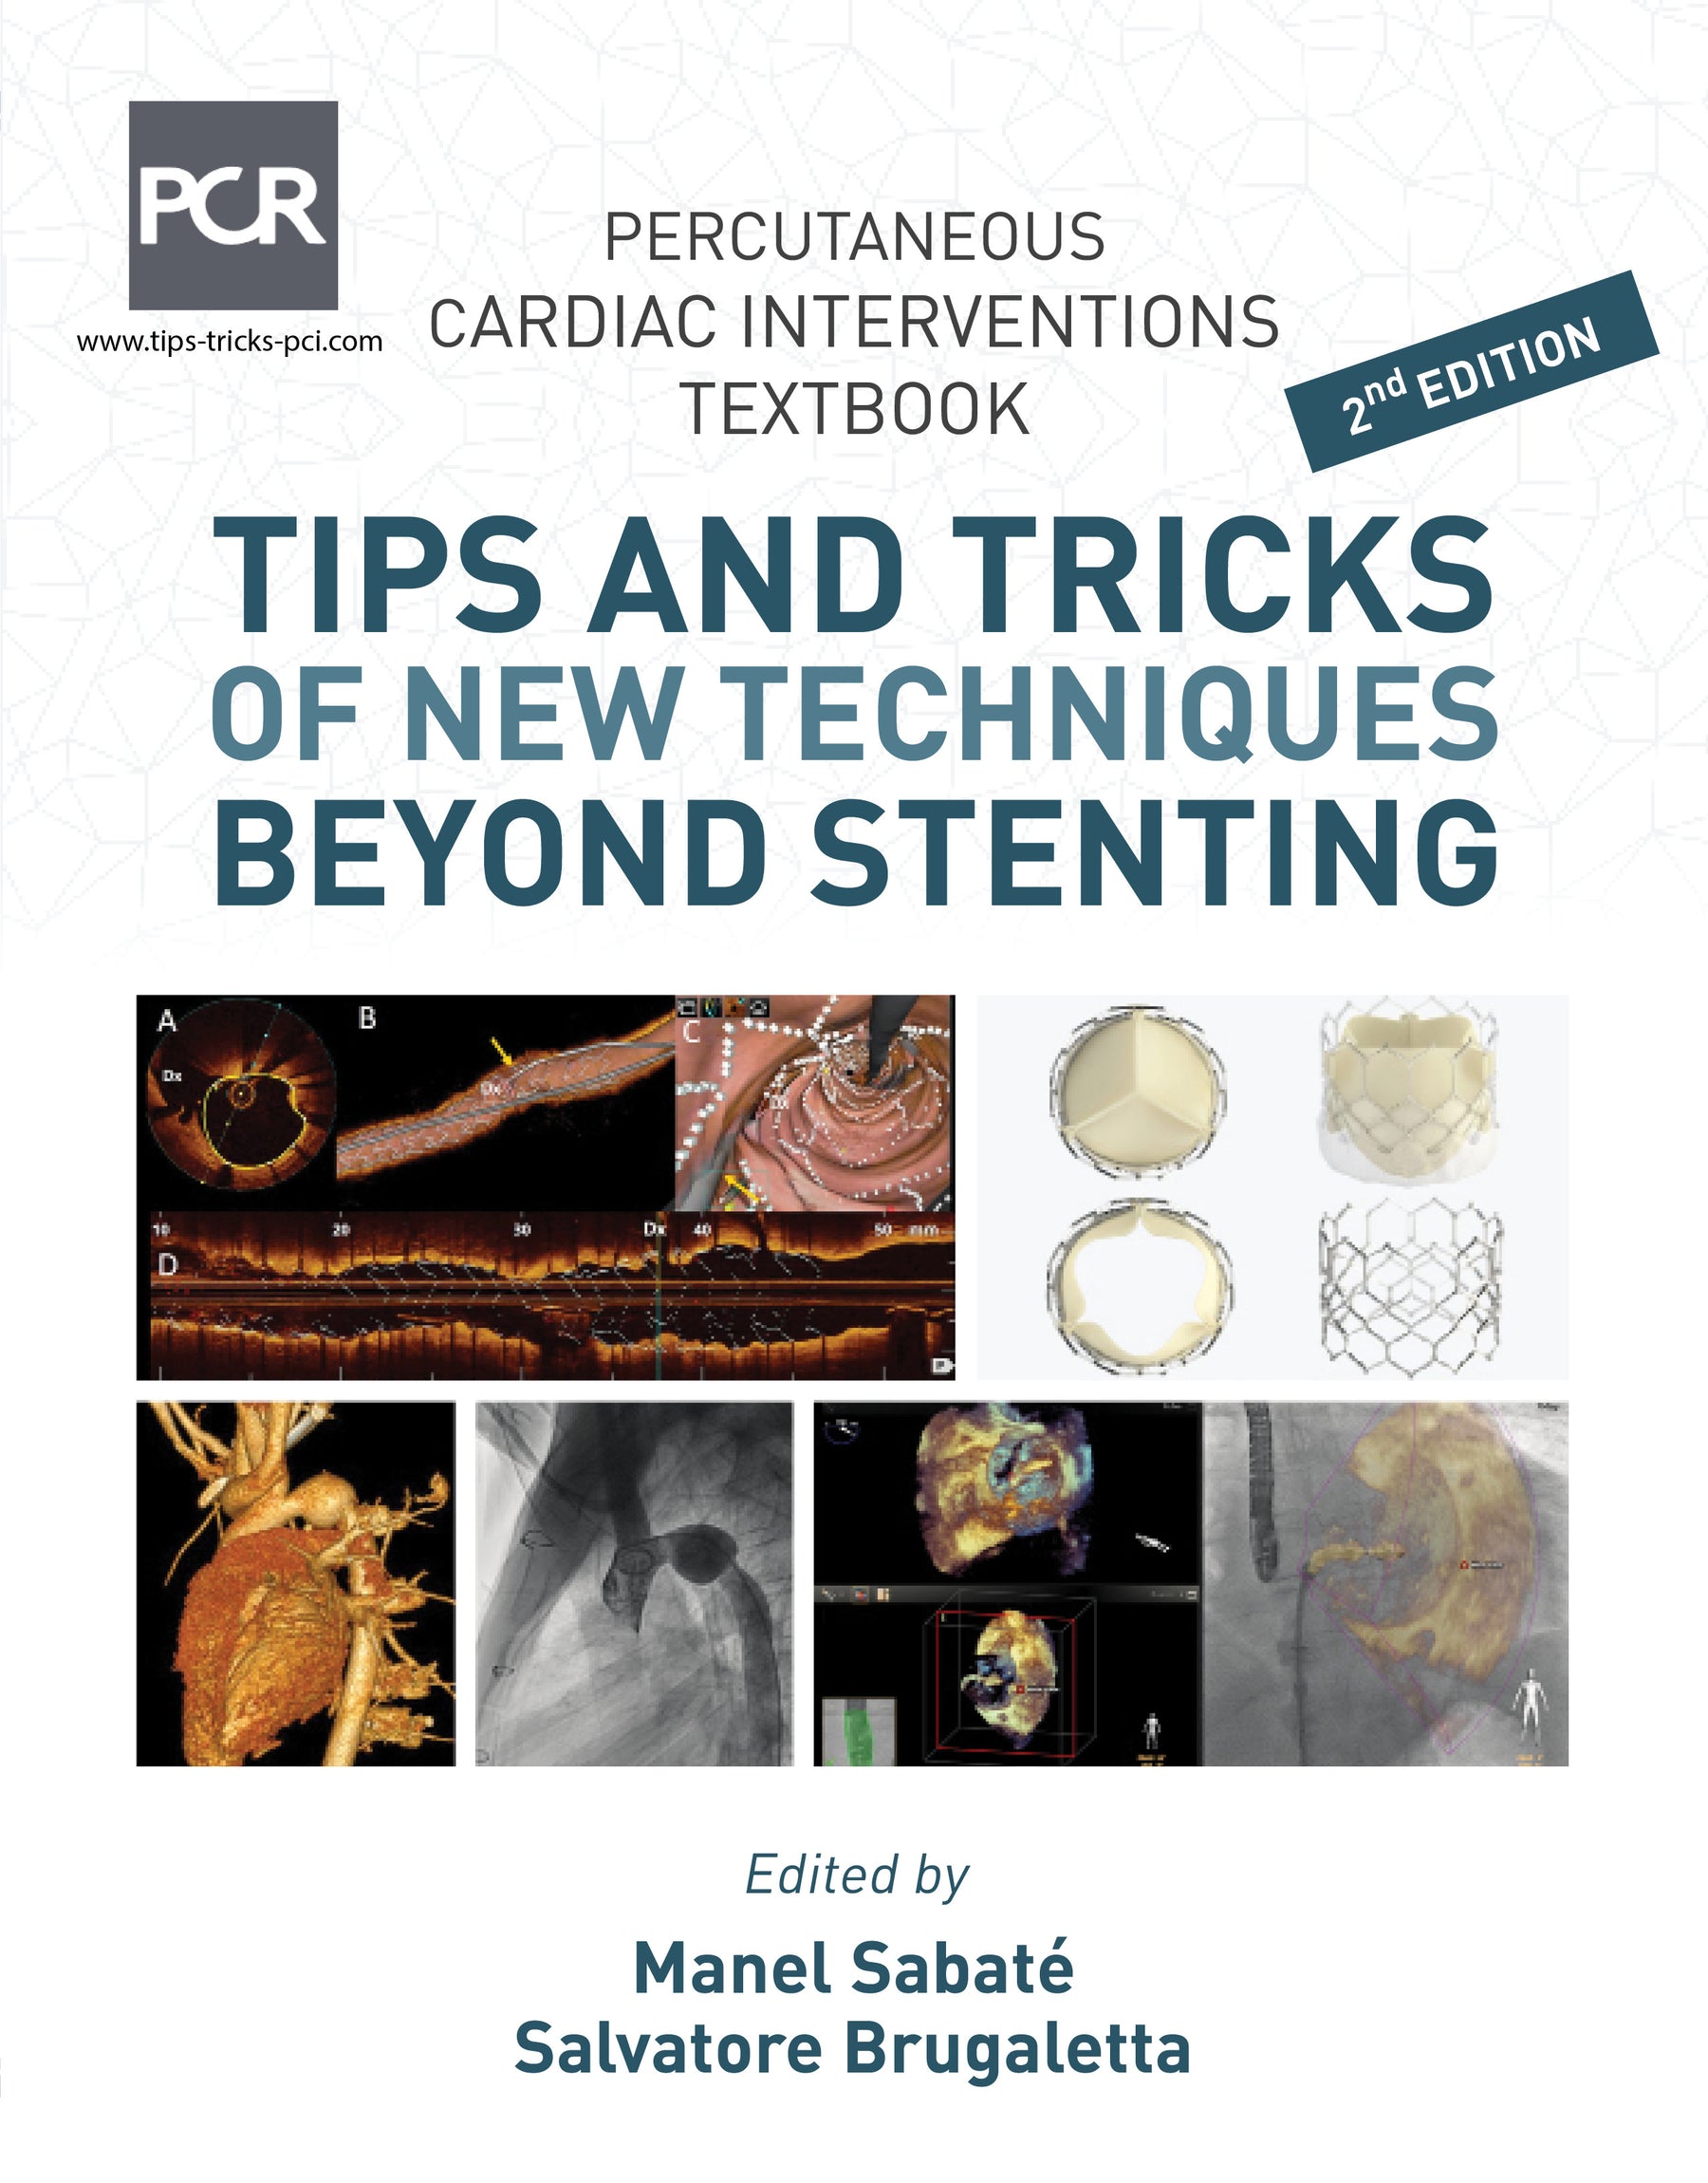 Tips and Tricks of New Techniques Beyond Stenting 2nd/2023
By Manel Sabate